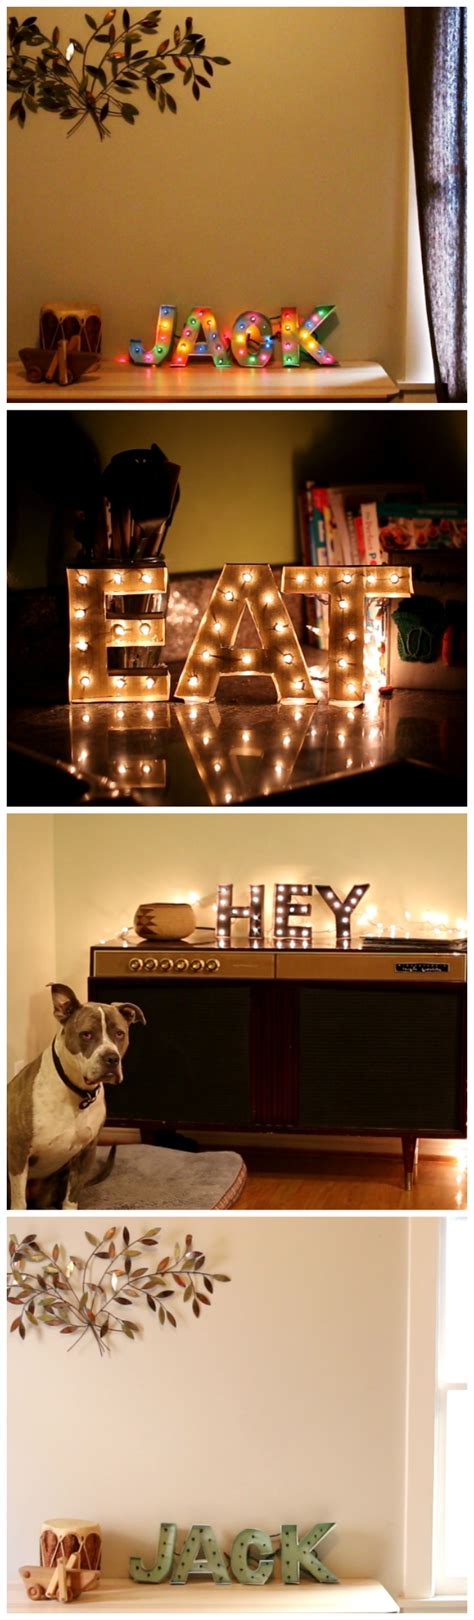 February 8, 2013 15 comments. Marquee Lights | Diy box crafts, Marquee lights diy, Home diy